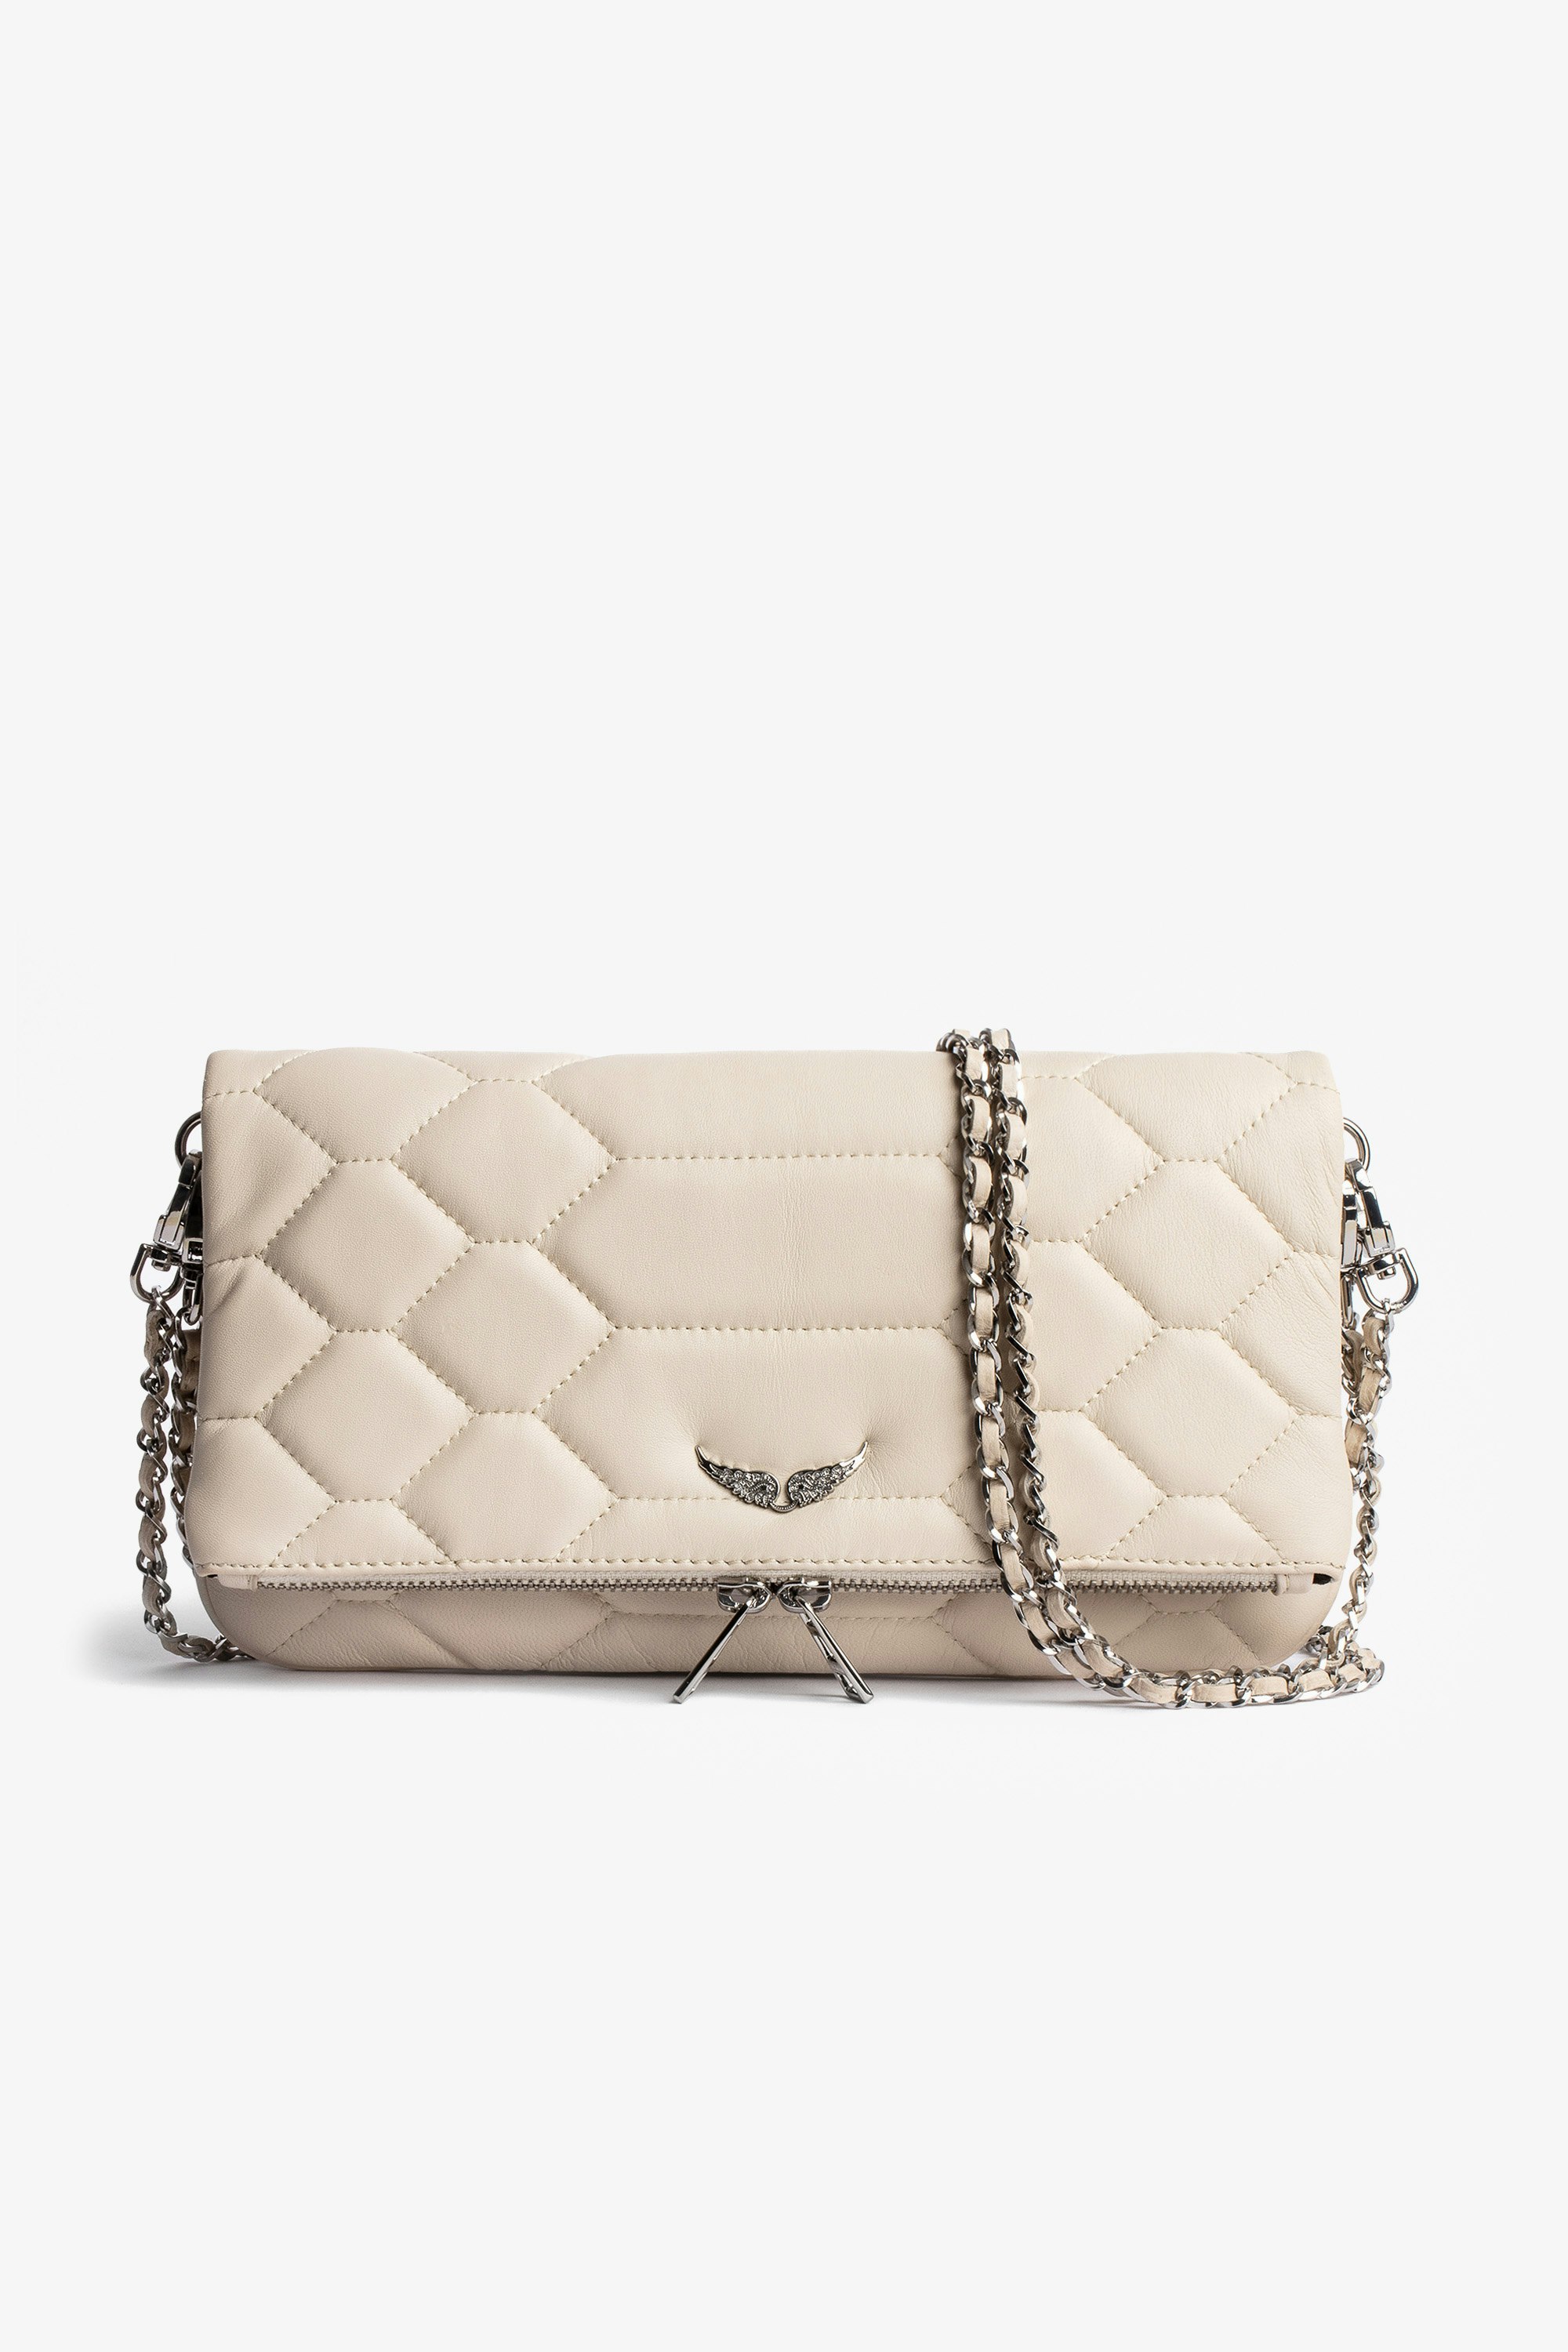 Rock Quilted Clutch - Women’s smooth quilted leather clutch bag with snake scale look in ecru